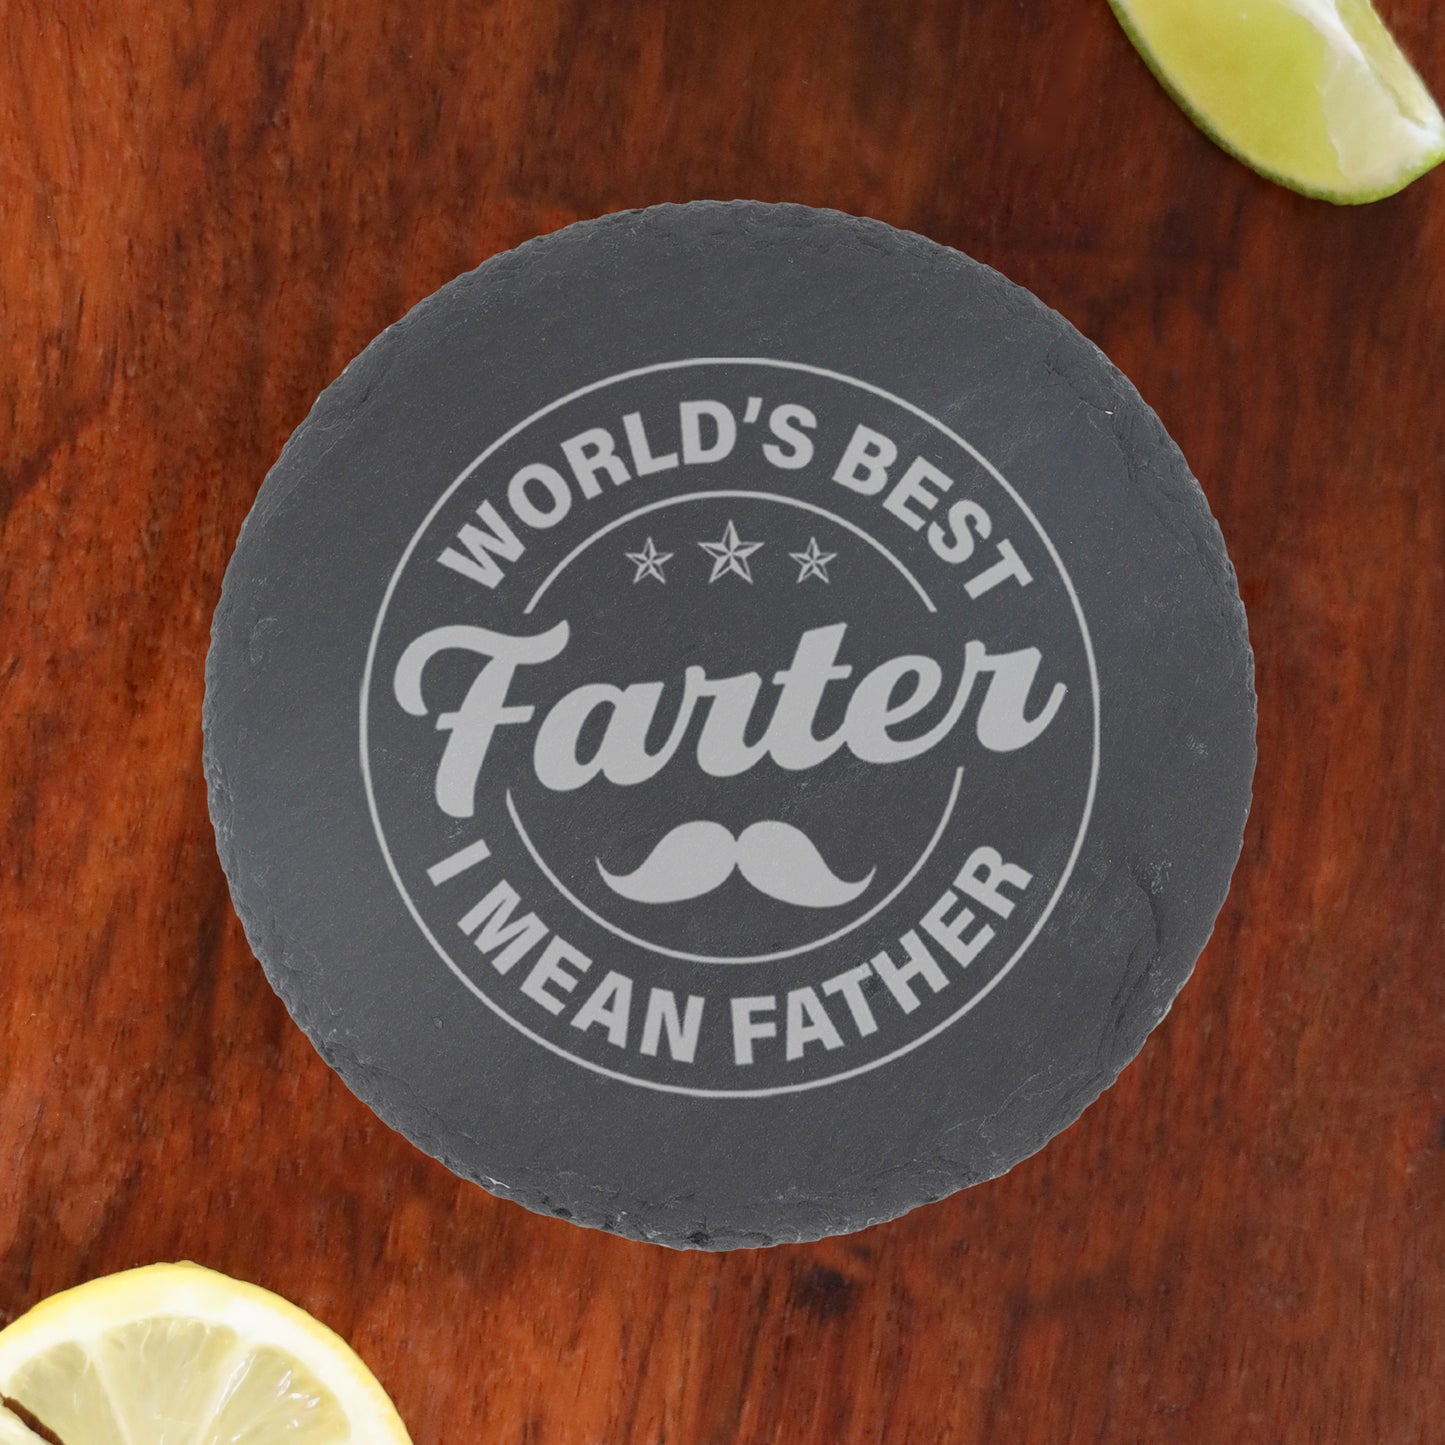 "Worlds Best Farter I Mean Father" Novelty Engraved Wine Glass and/or Coaster Set  - Always Looking Good - Round Coaster Only Circle Design 